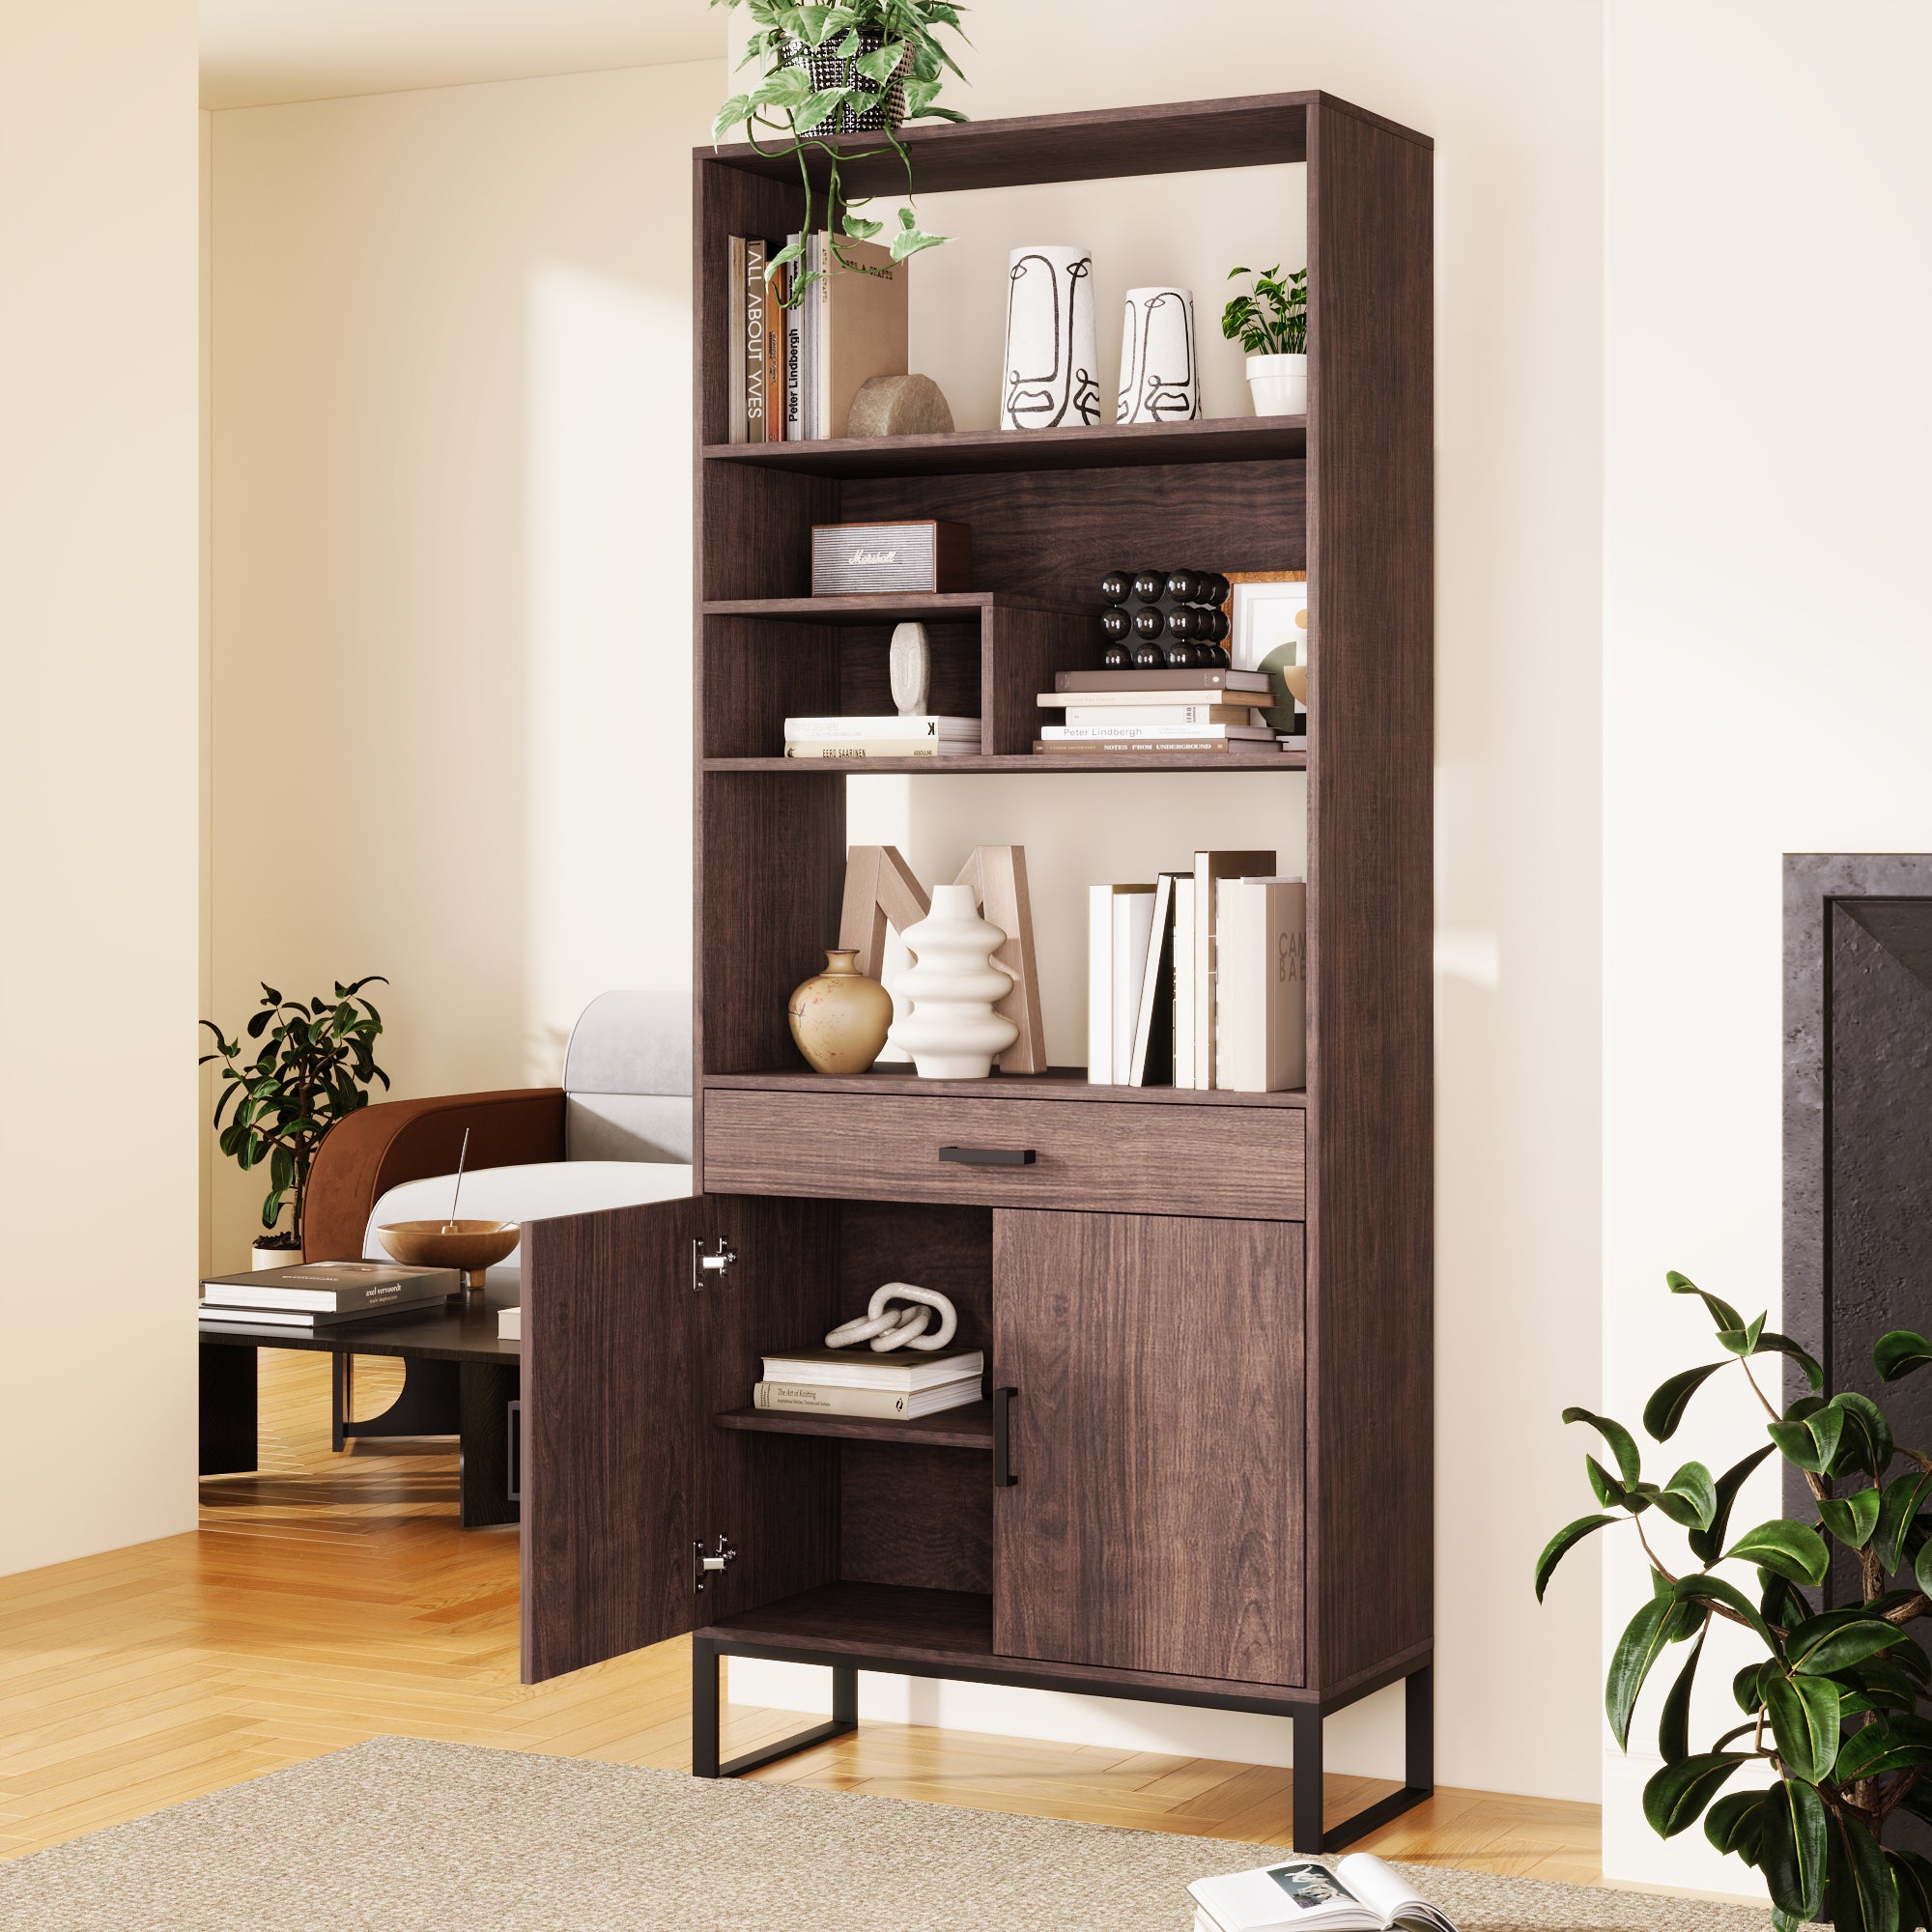 🆓🚛 75.9" Modern Open Bookshelf With Doors, Bookcase With Storage Drawer and Led Strip Lights, Free Standing Display Rack, Wooden Tall Bookshelf for Living Room and Office, Walnut